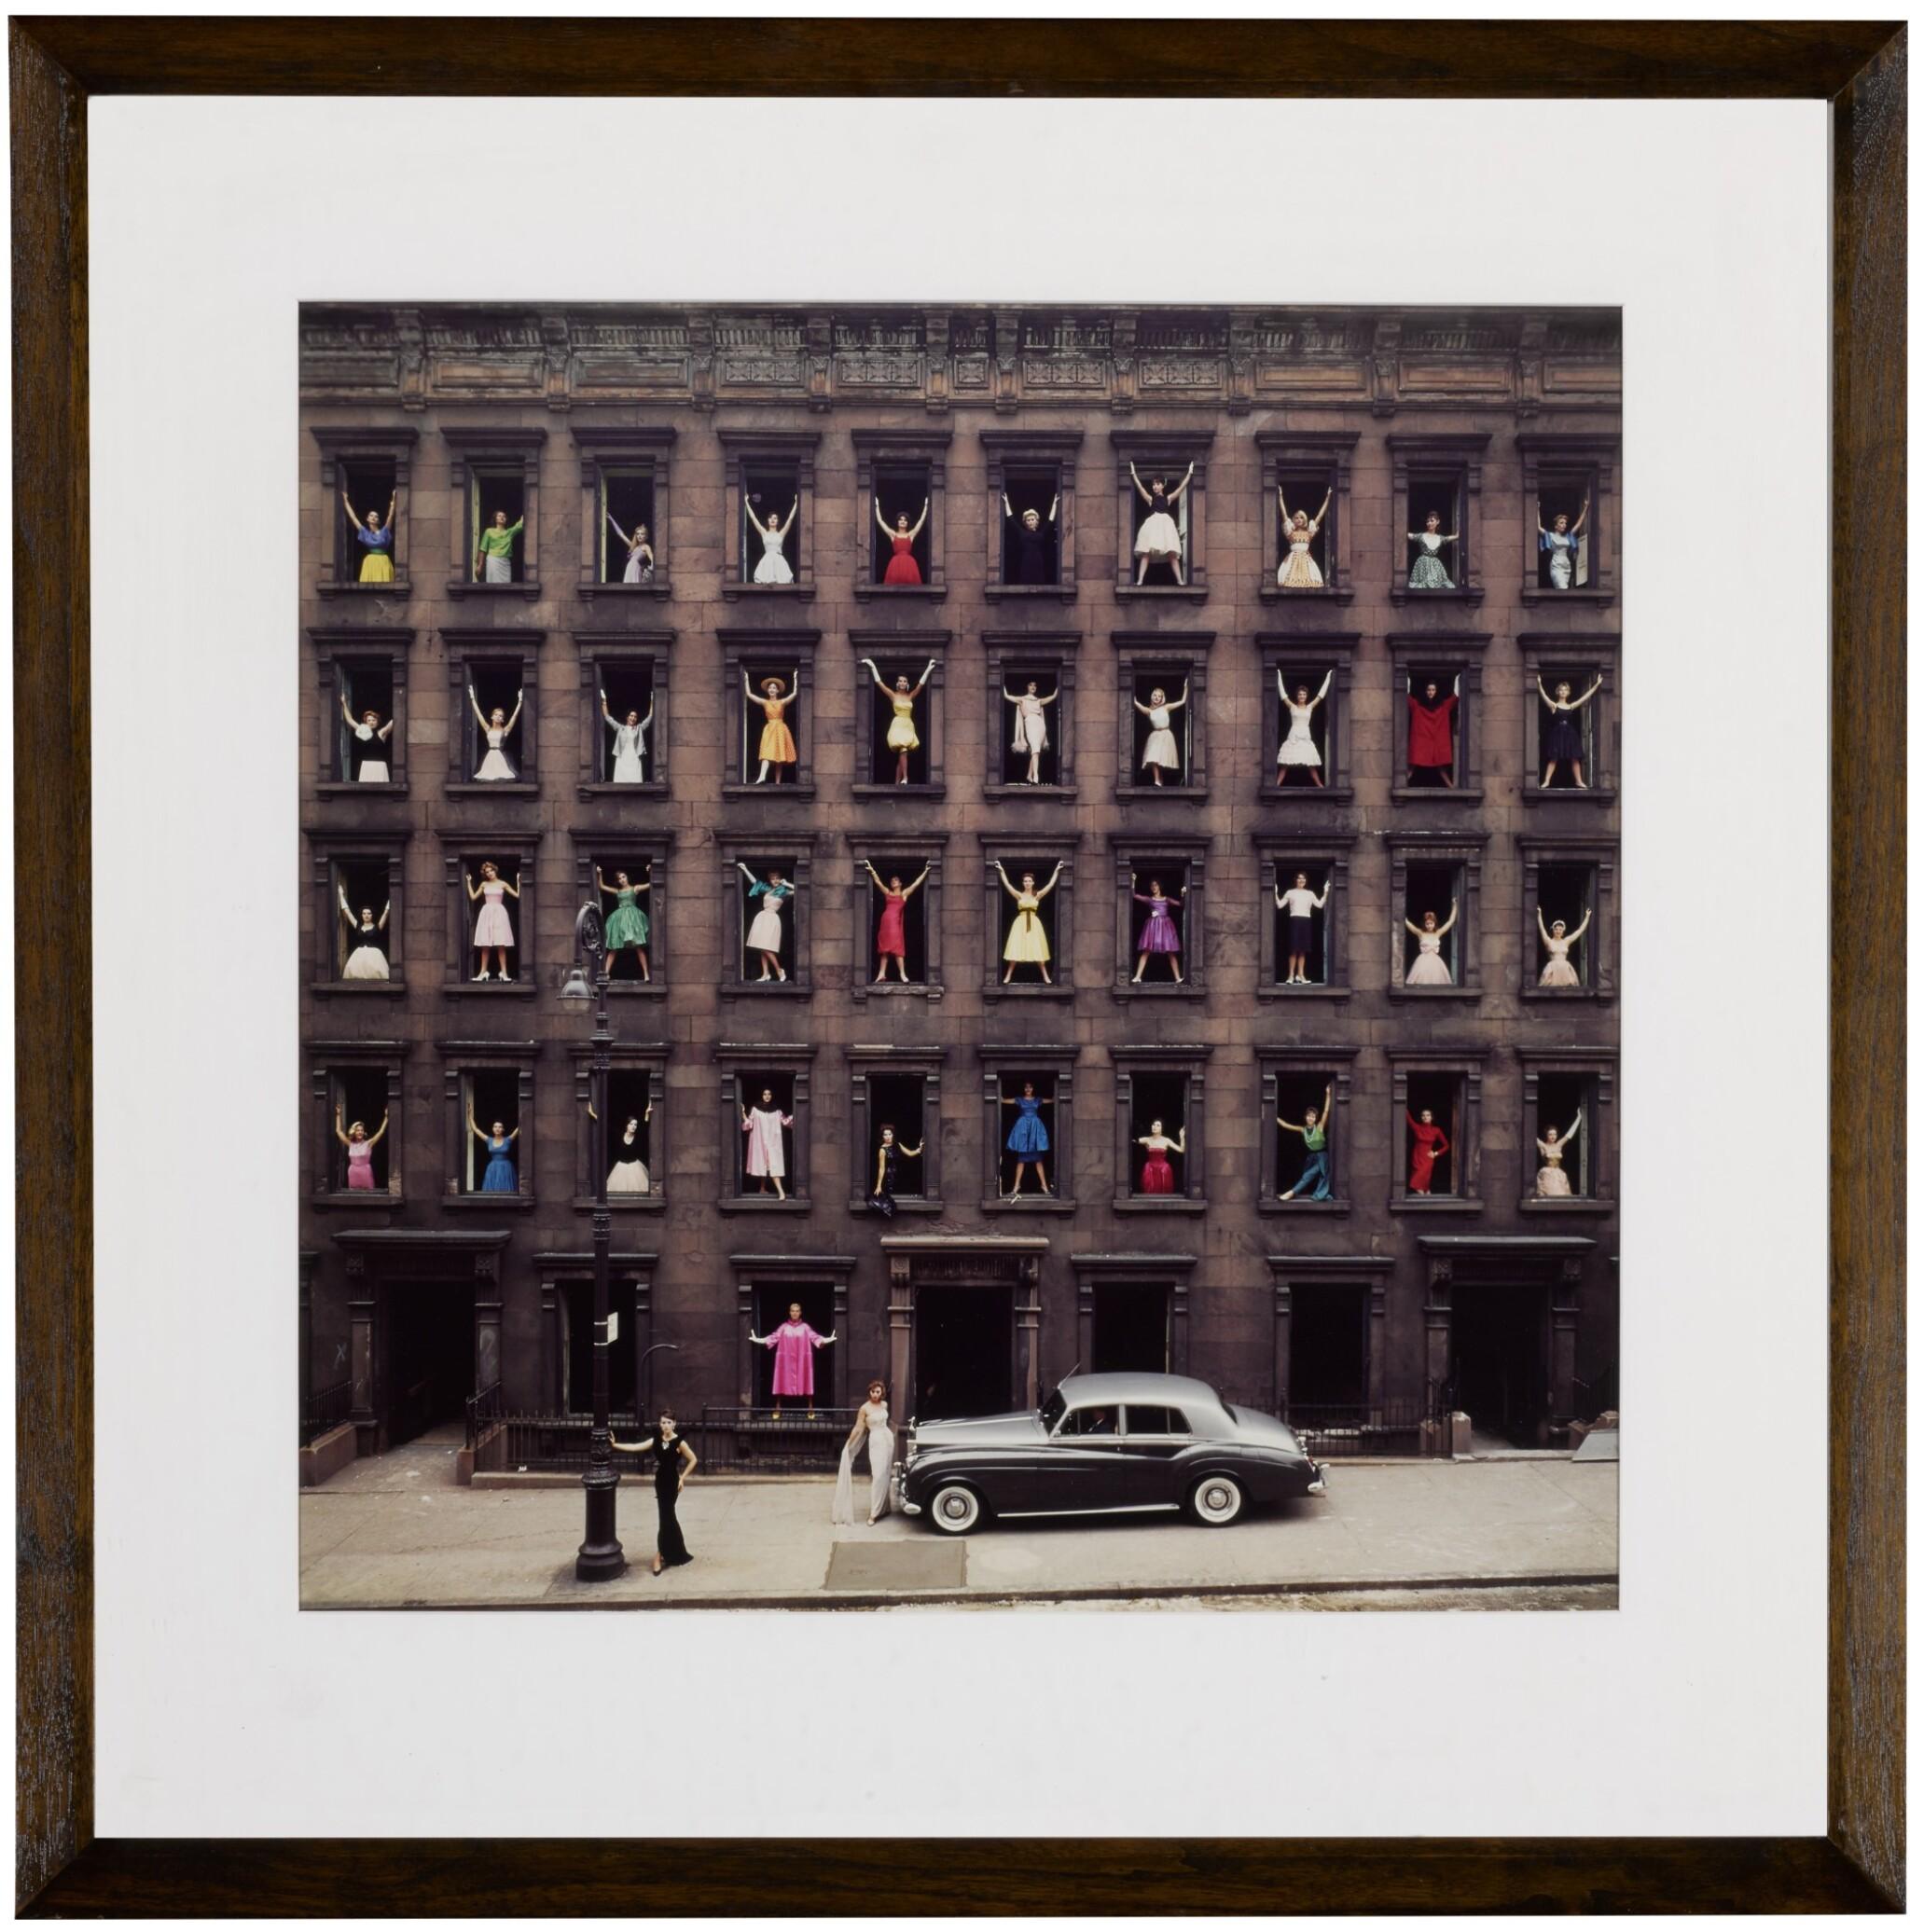 Ormond Gigli
Girls in the Window, 1960 (printed later)
Color coupler print
60 x 60 inches
Edition of 4
Signed, numbered and dated by the artist

Ormond Gigli: The Visionary Behind the 